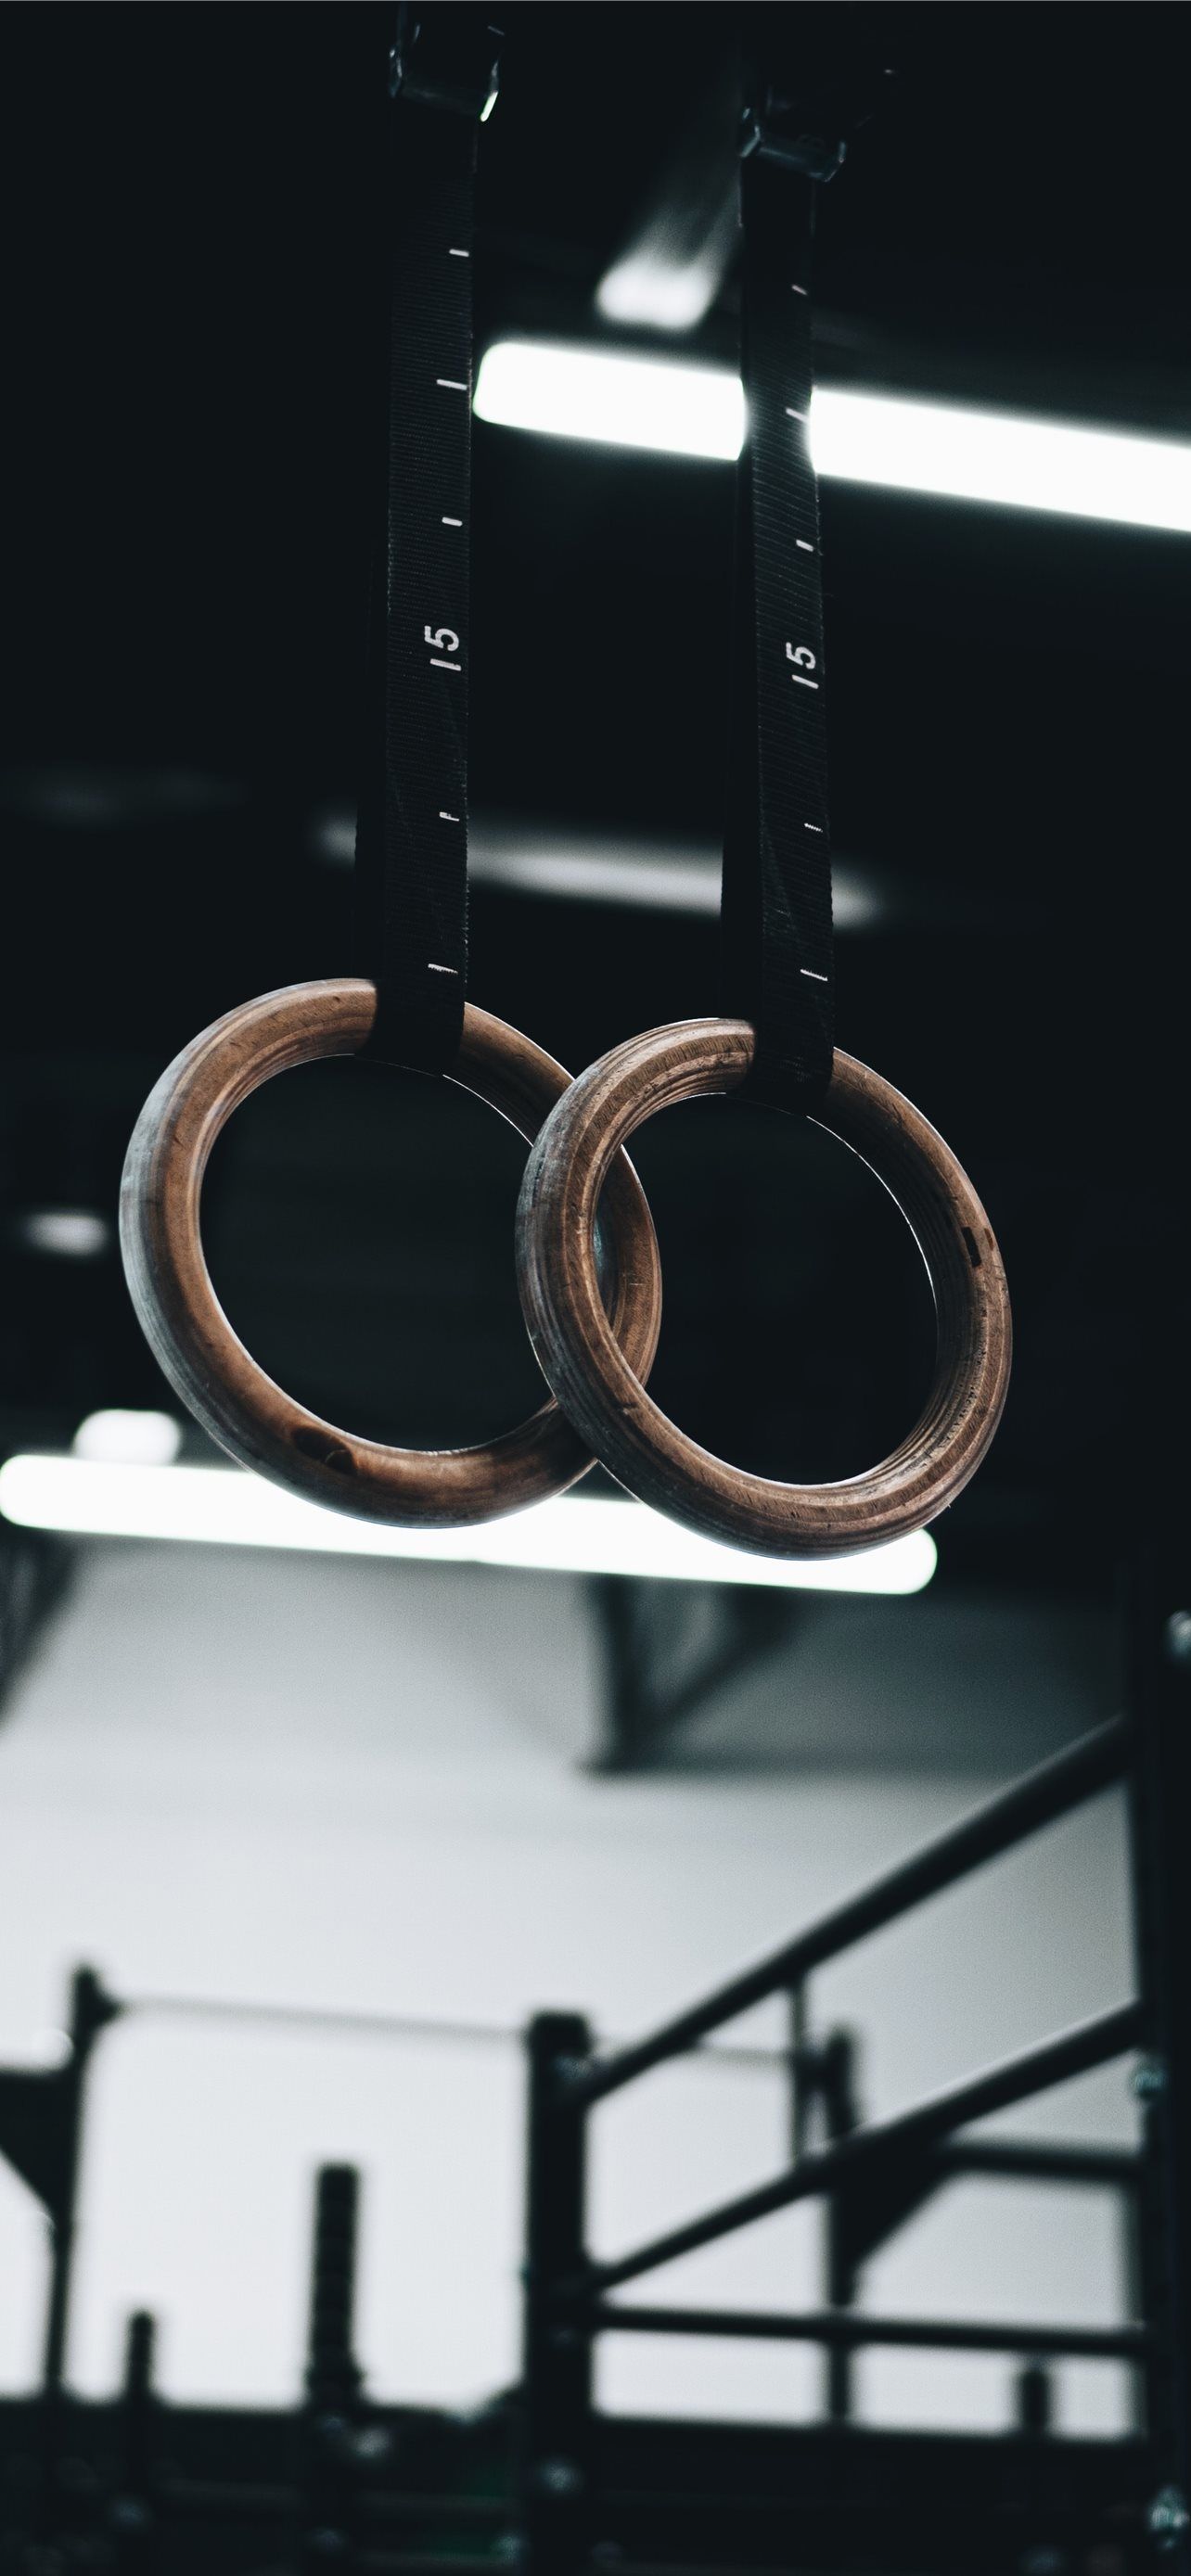 A pair of wooden gymnastic rings hanging from a black strap - Gymnastics